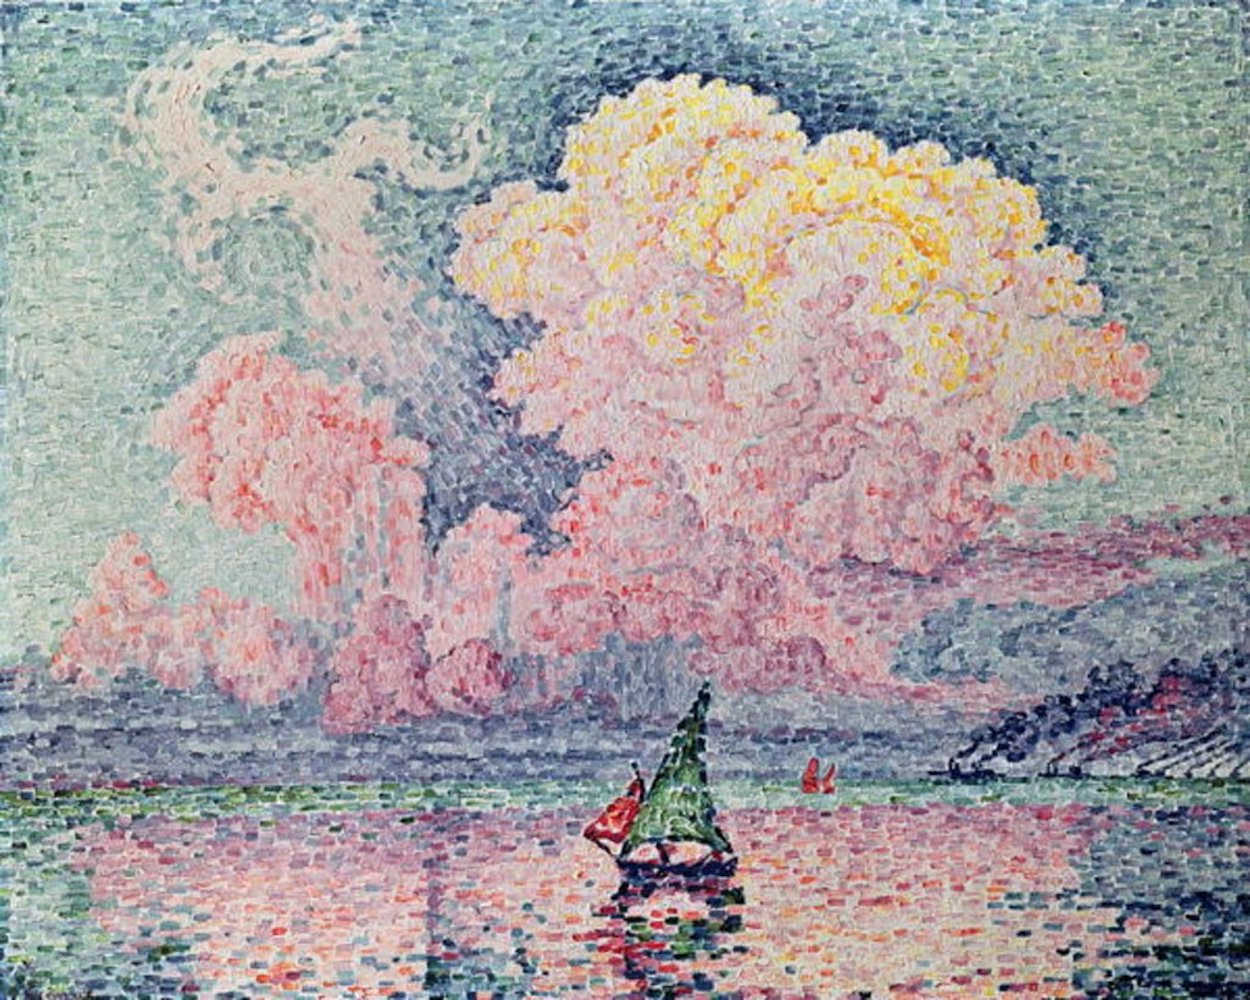 Antibes, the Pink Cloud by Paul Signac - 1916 - 92 x 73 cm Museum of Fine Arts Boston